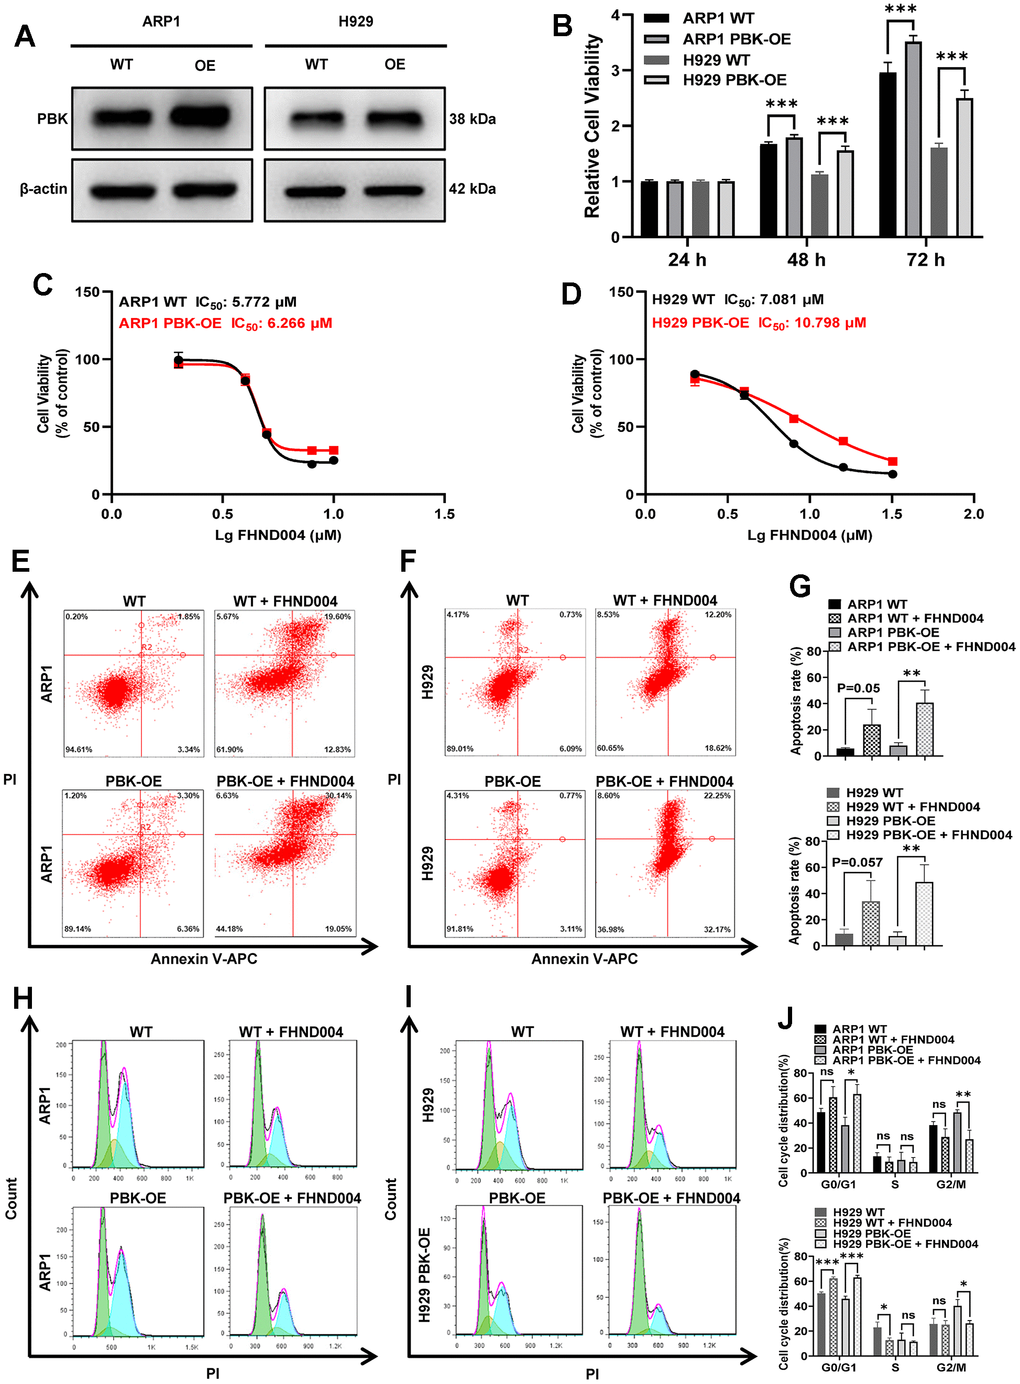 FHND004 targets PBK to inhibit MM cell proliferation. (A) WB analysis confirmed that PBK-OE MM cells were constructed successfully verified. (B) The proliferation of PBK-OE and PBK-WT cells was detected by CCK-8. (C, D) Effects of 48 h treatment with FHND004 on the viability of ARP1 (C) and H929 (D) WT and PBK-OE cells. (E–G) Effects of 24 h treatment with FHND004 (4 μM) on the apoptosis of ARP1 (E) and H929 (F) WT and PBK-OE cells. (H–J) Effects of 48 h treatment with FHND004 (4 μM) on the cell cycle phases of ARP1 (H) and H929 (I) WT and PBK-OE cells. The data were expressed as the mean ± SD, n = 3; p p p 